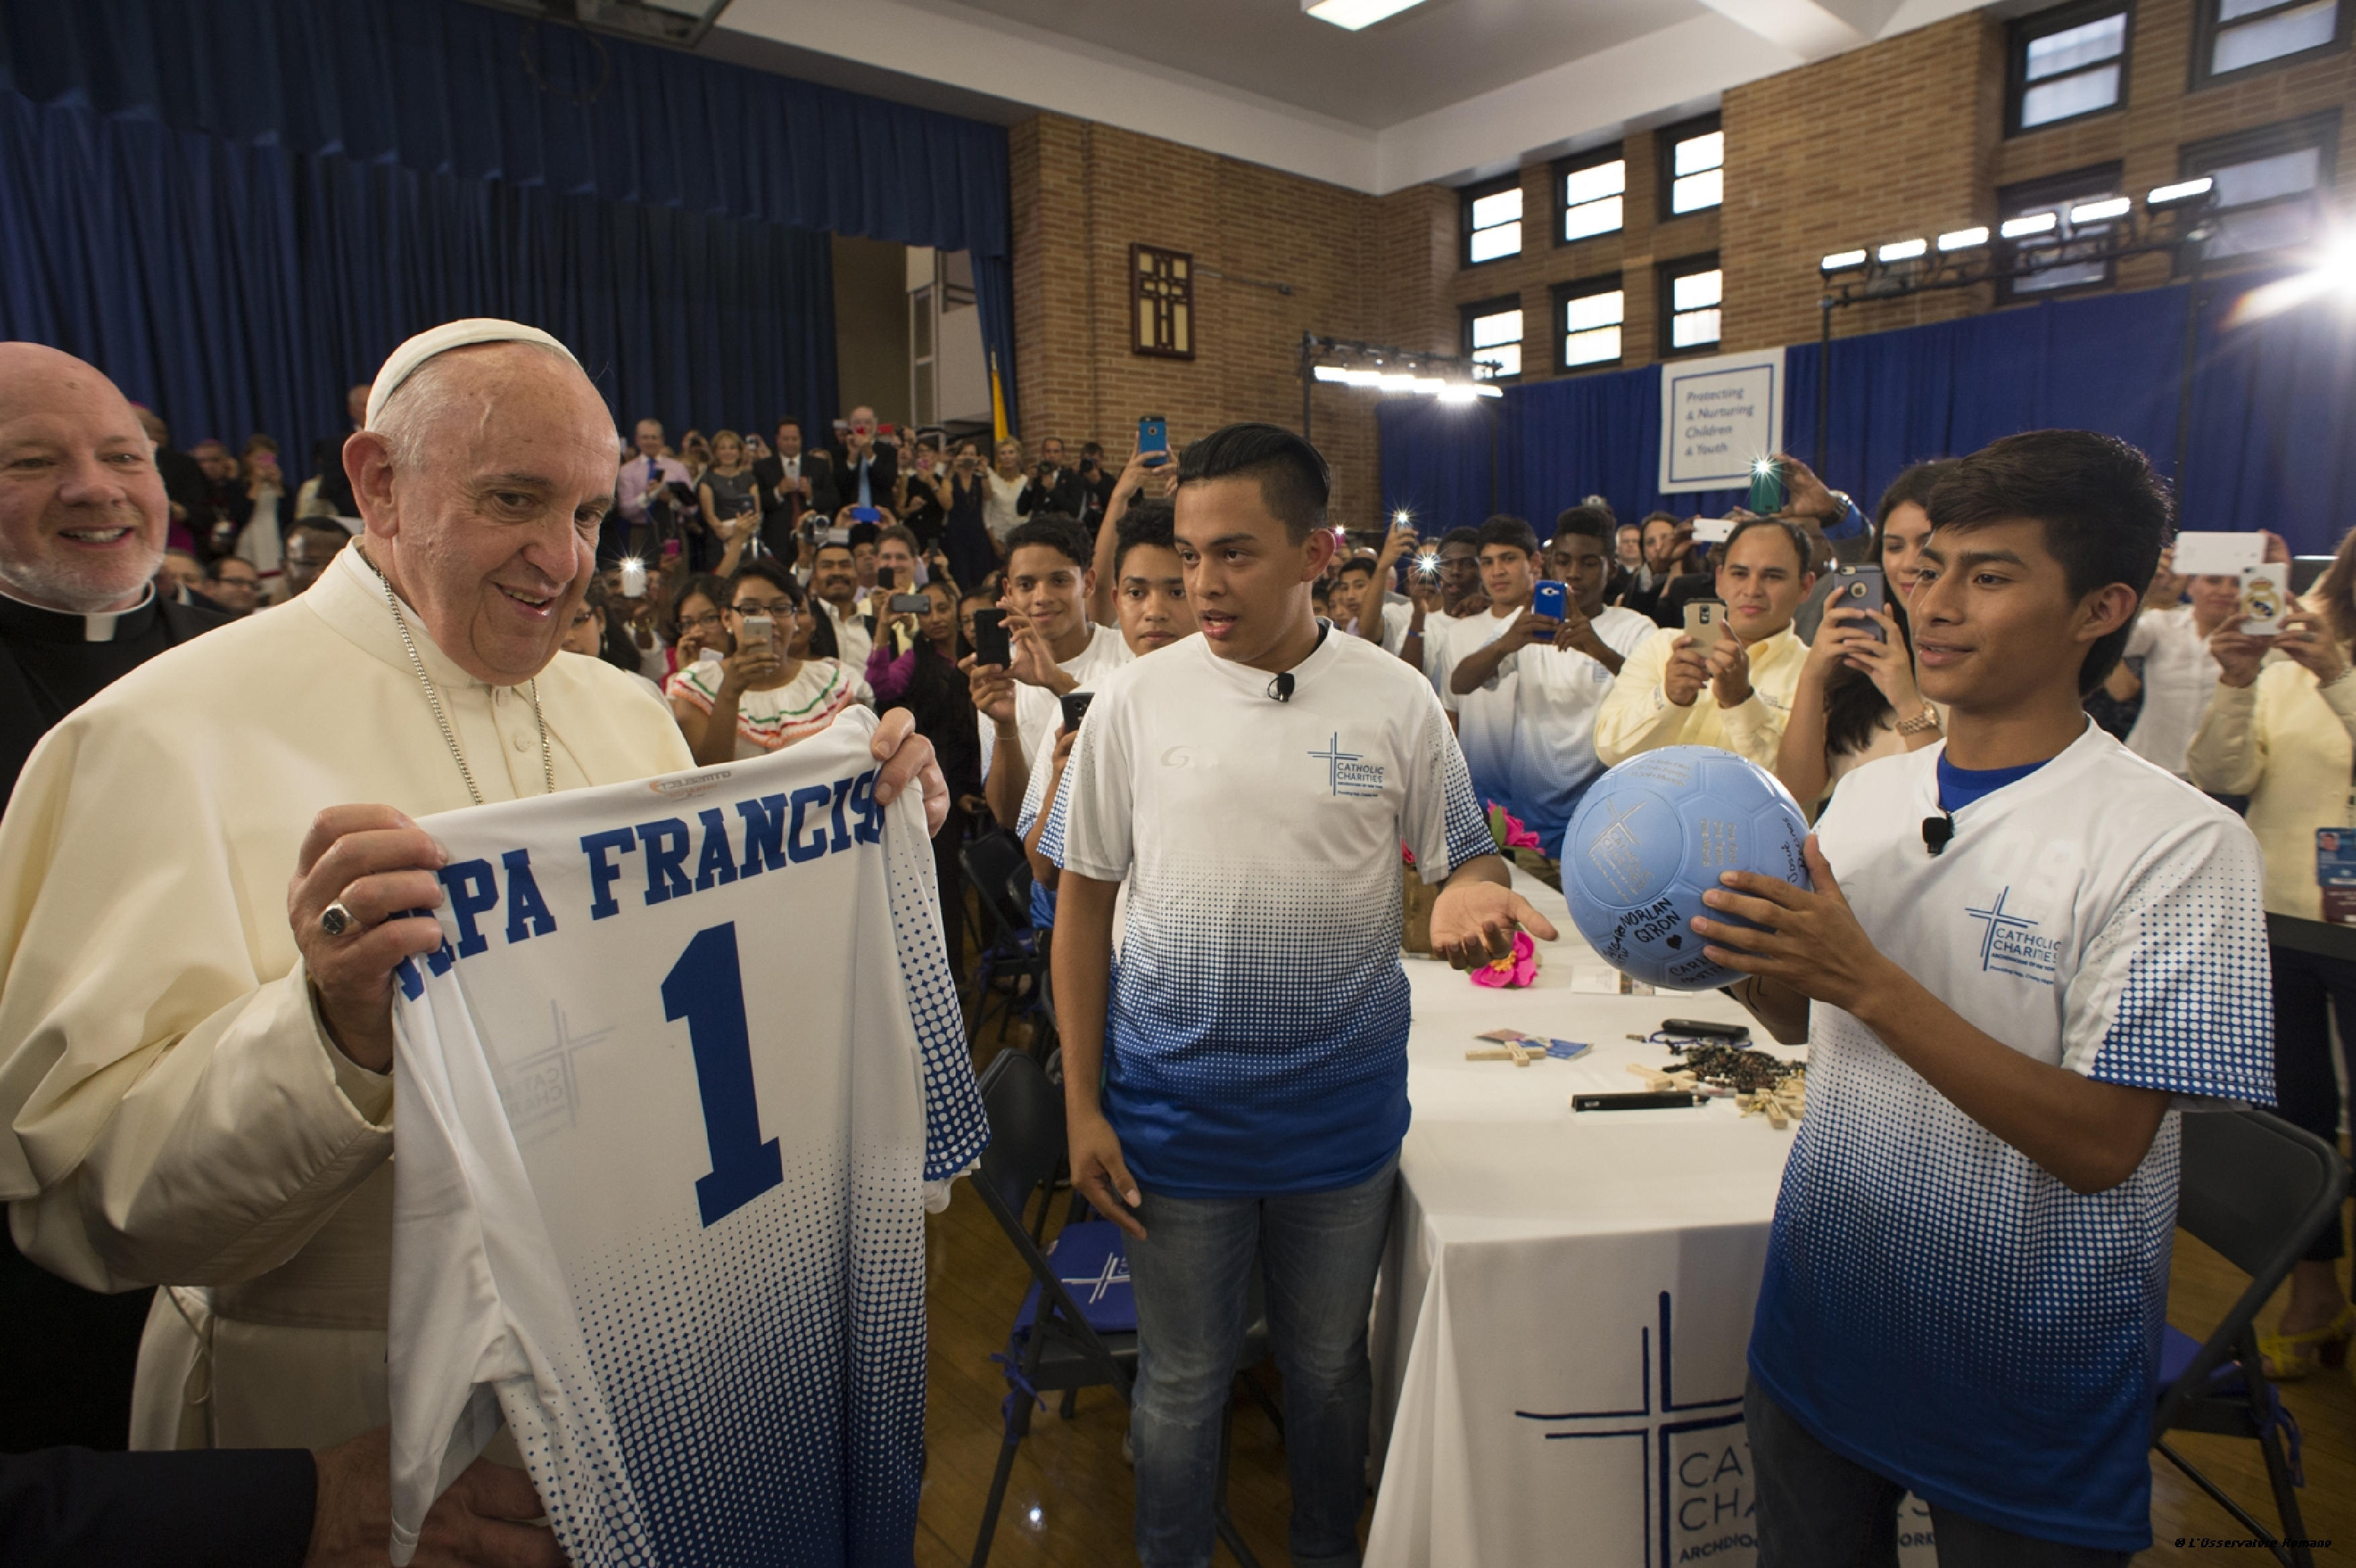 Pope Francis during his visit at Our Lady Queen of Angels School in East Harlem